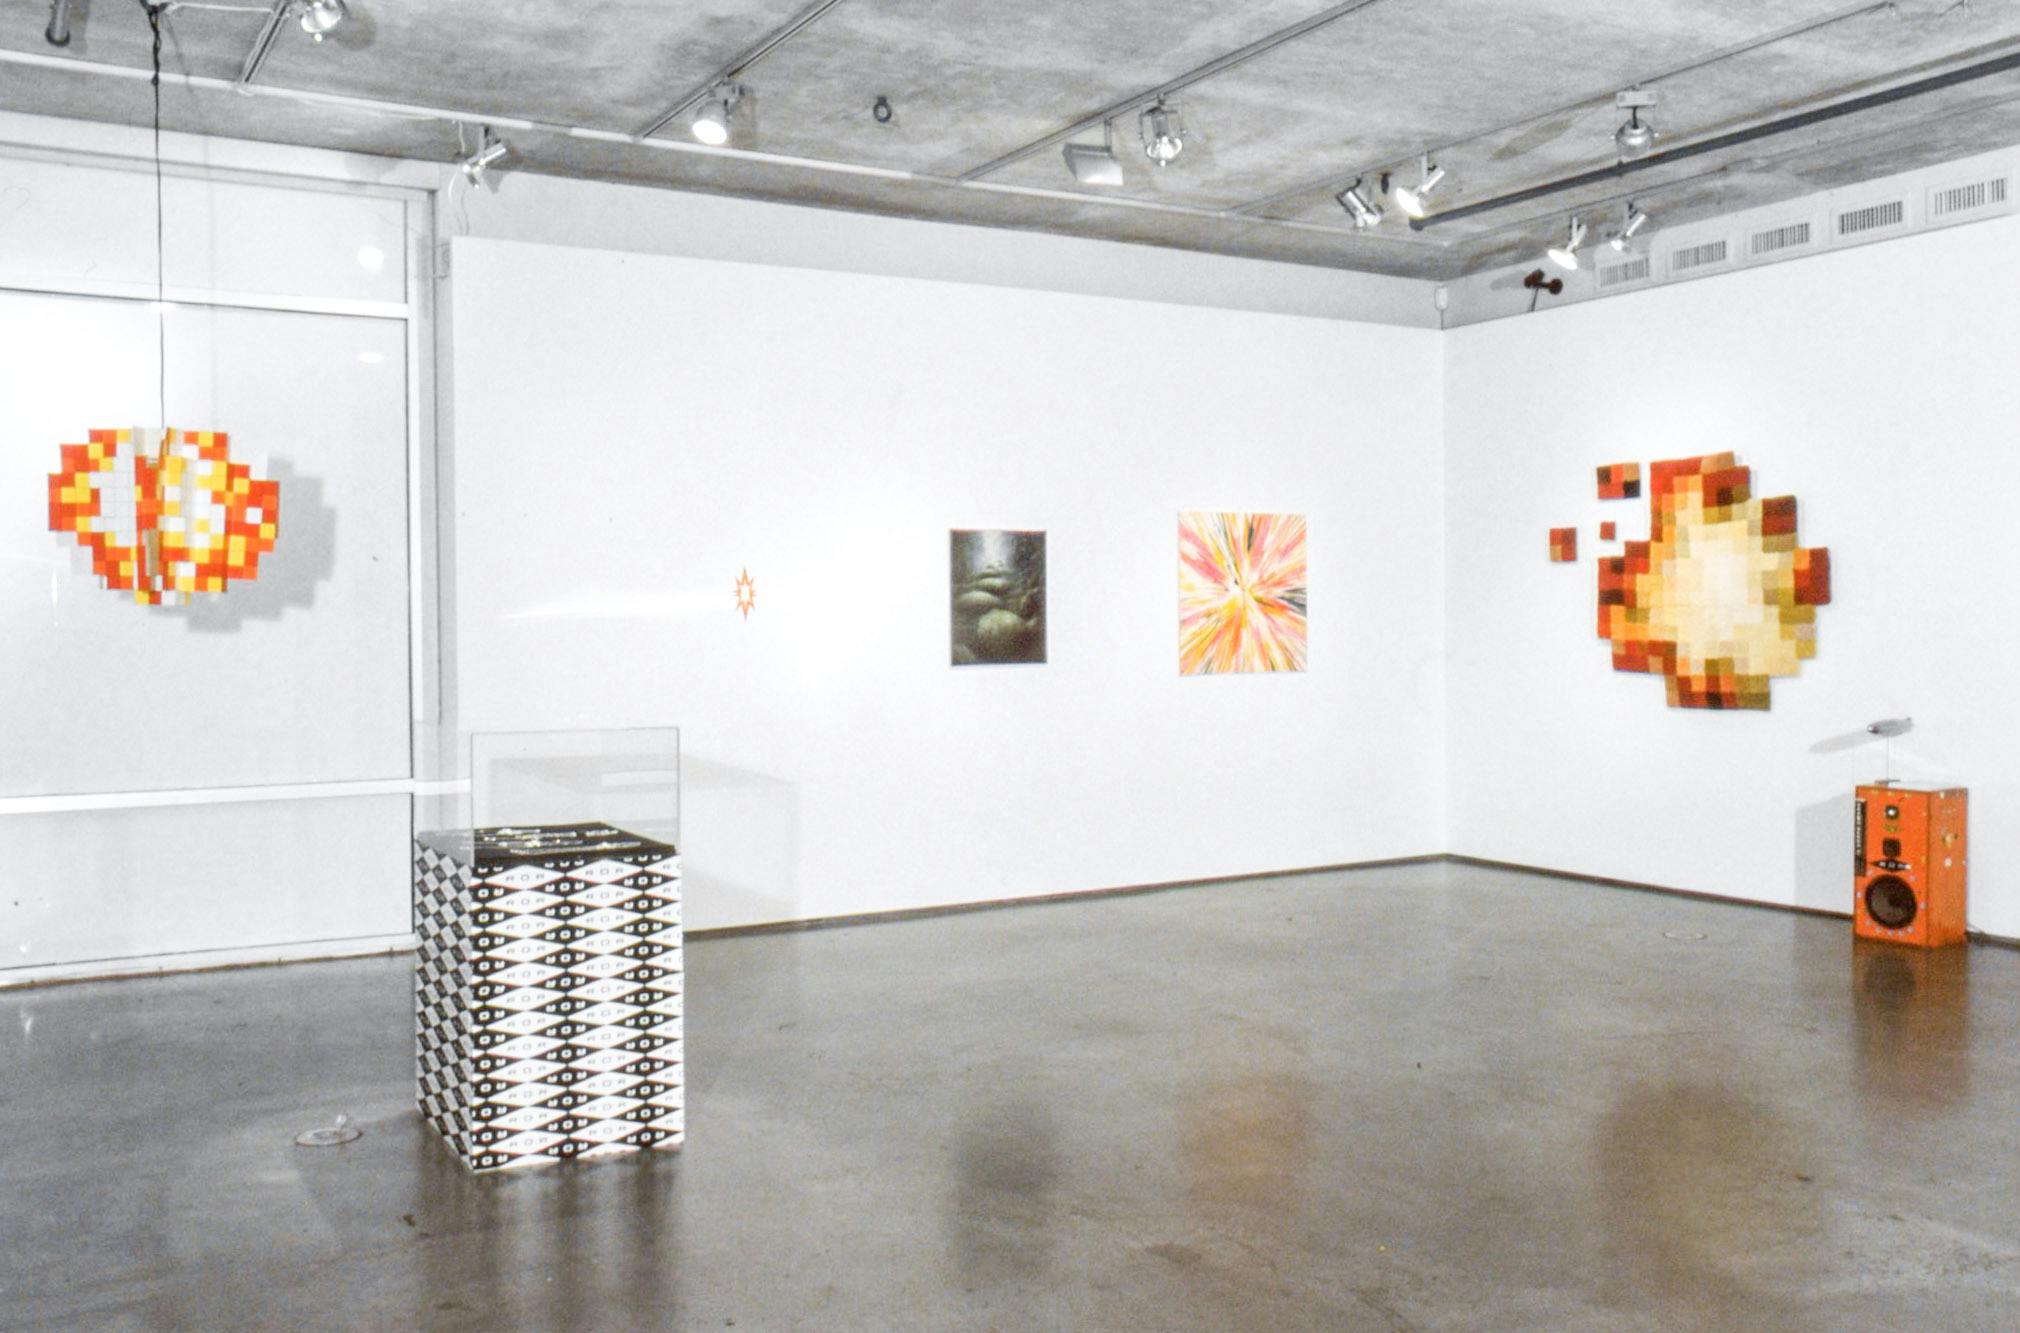 Installation image of works in a gallery. A display case sits in the middle of the floor. Three pictures are mounted on the far wall. An orange-brown sculpture is mounted on the other wall. 